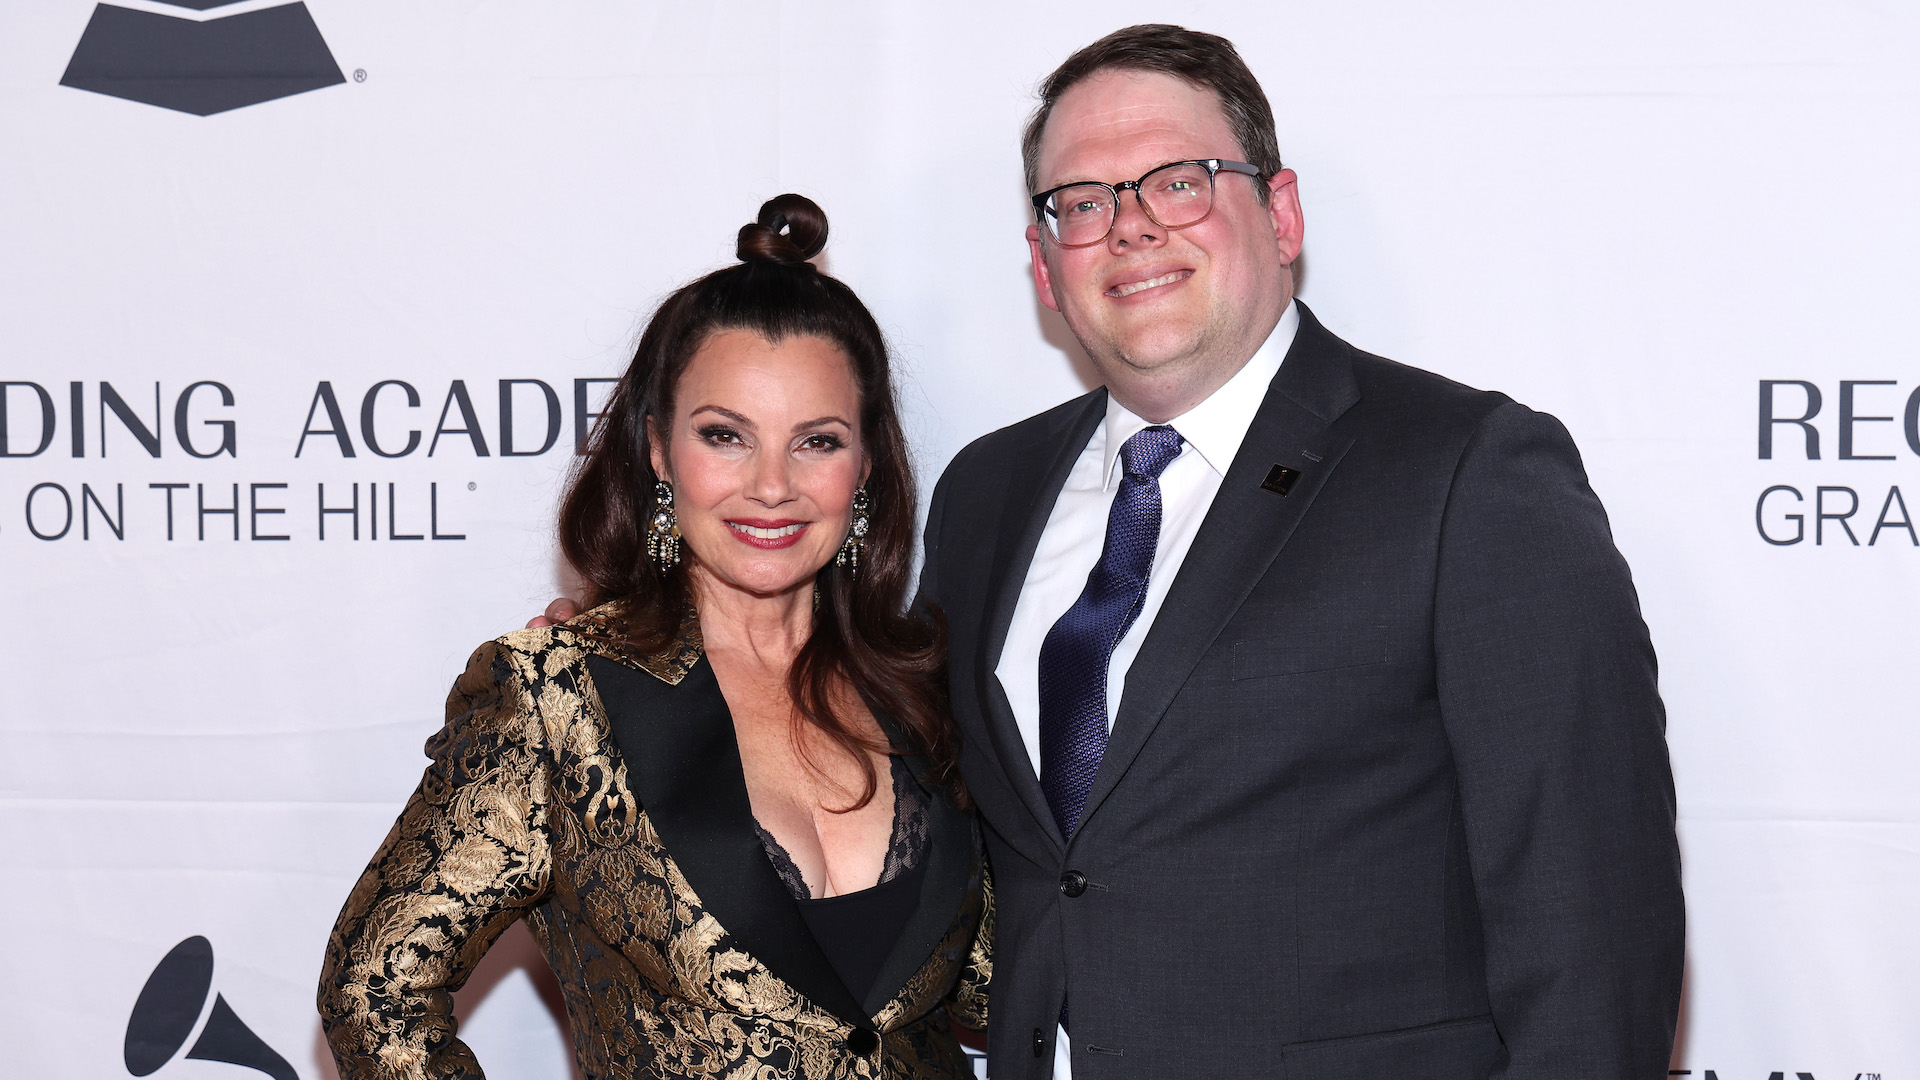 WASHINGTON, DC - APRIL 26: (L-R) Actress Fran Drescher and Duncan Crabtree-Ireland, National Executive Director and Chief Negotiator of SAG-AFTRA attend Grammys On The Hill: Awards Dinner at The Hamilton on April 26, 2023 in Washington, DC. (Photo by Paul Morigi/Getty Images for The Recording Academy)